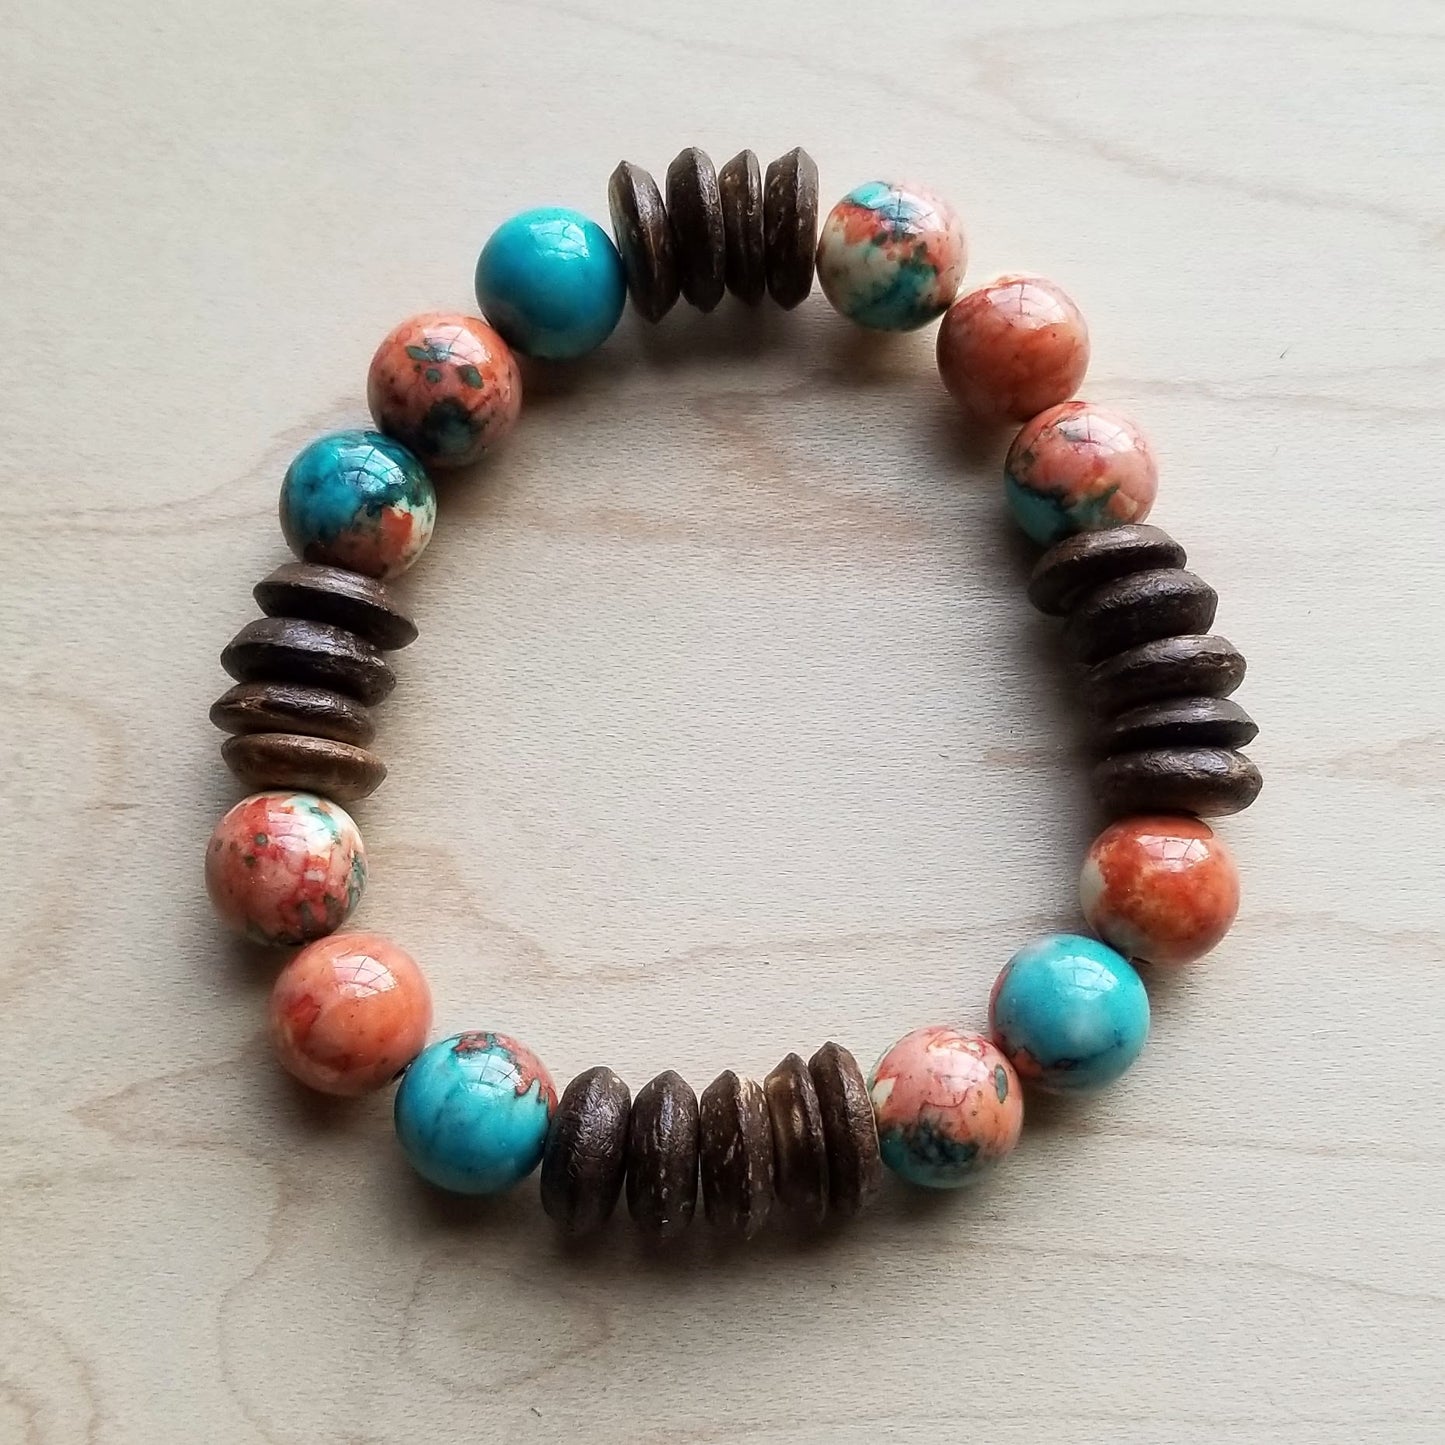 Colorfull Wooden Beads on Thread, Fashionable Beaded Bracelets